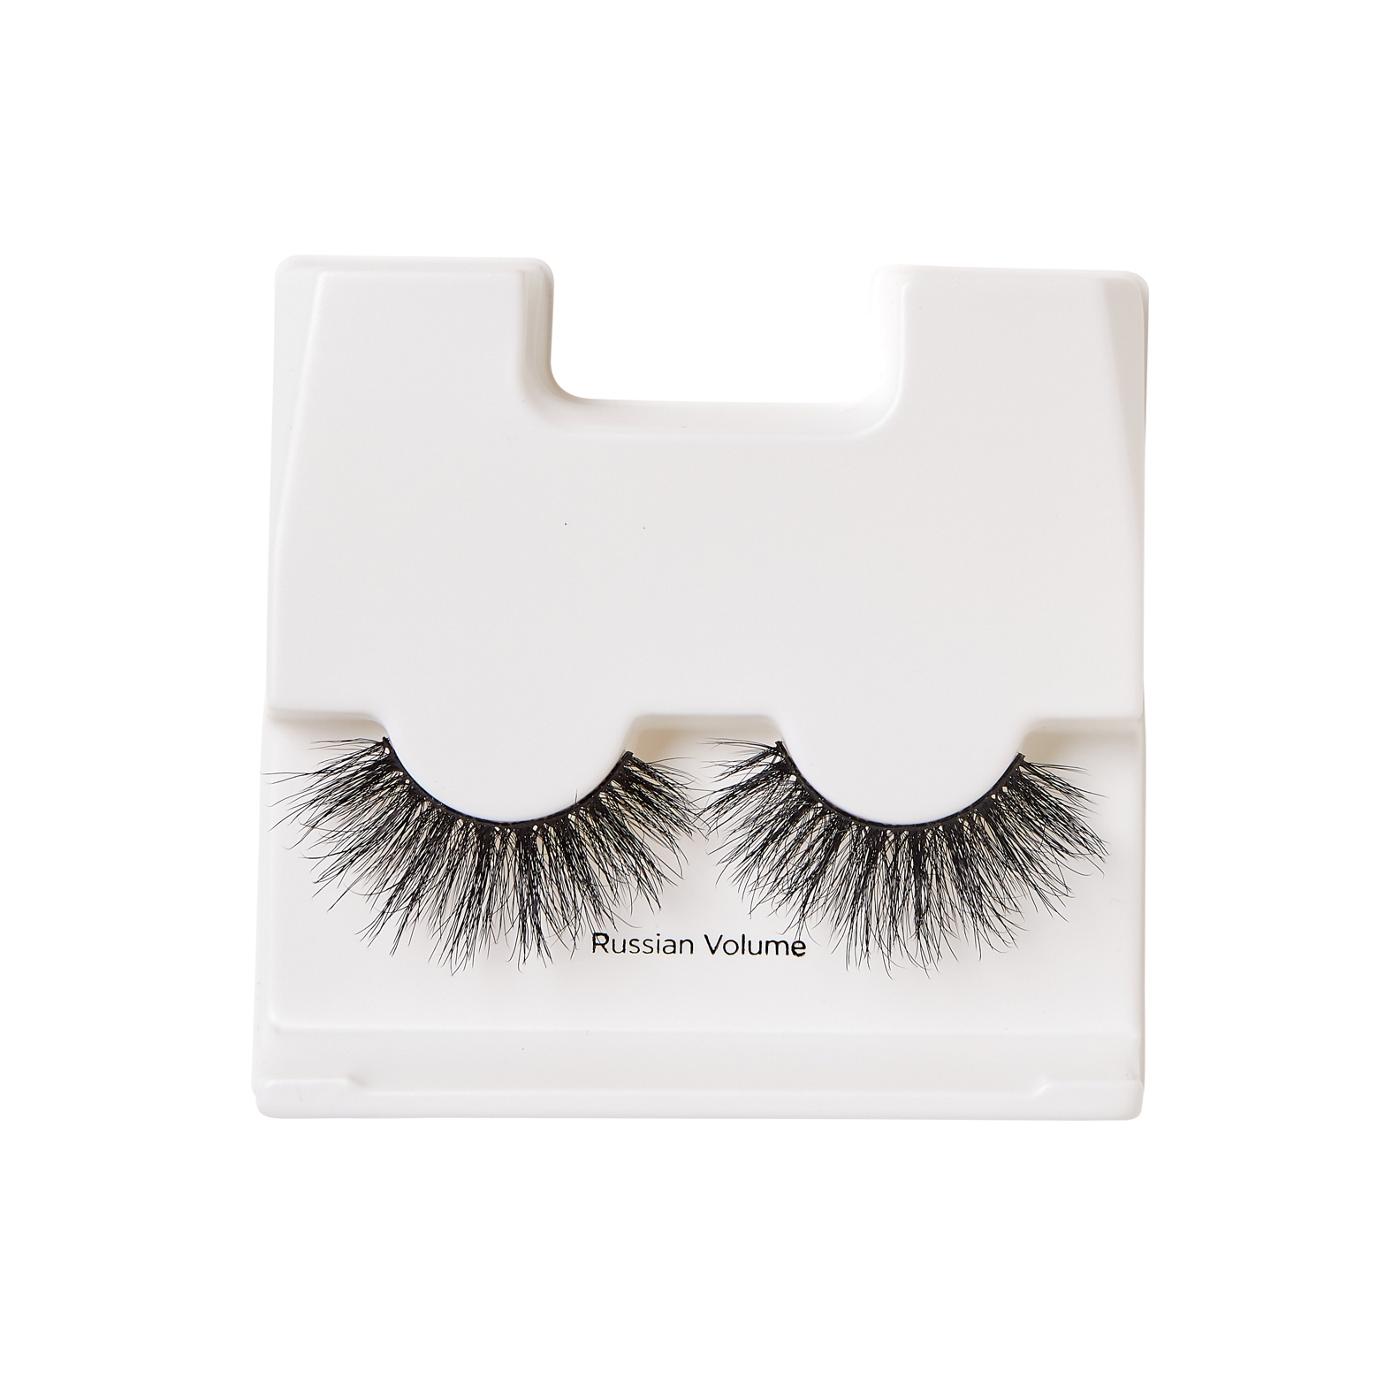 KISS Lash Couture Luxtensions Collection - Russian Volume; image 4 of 6